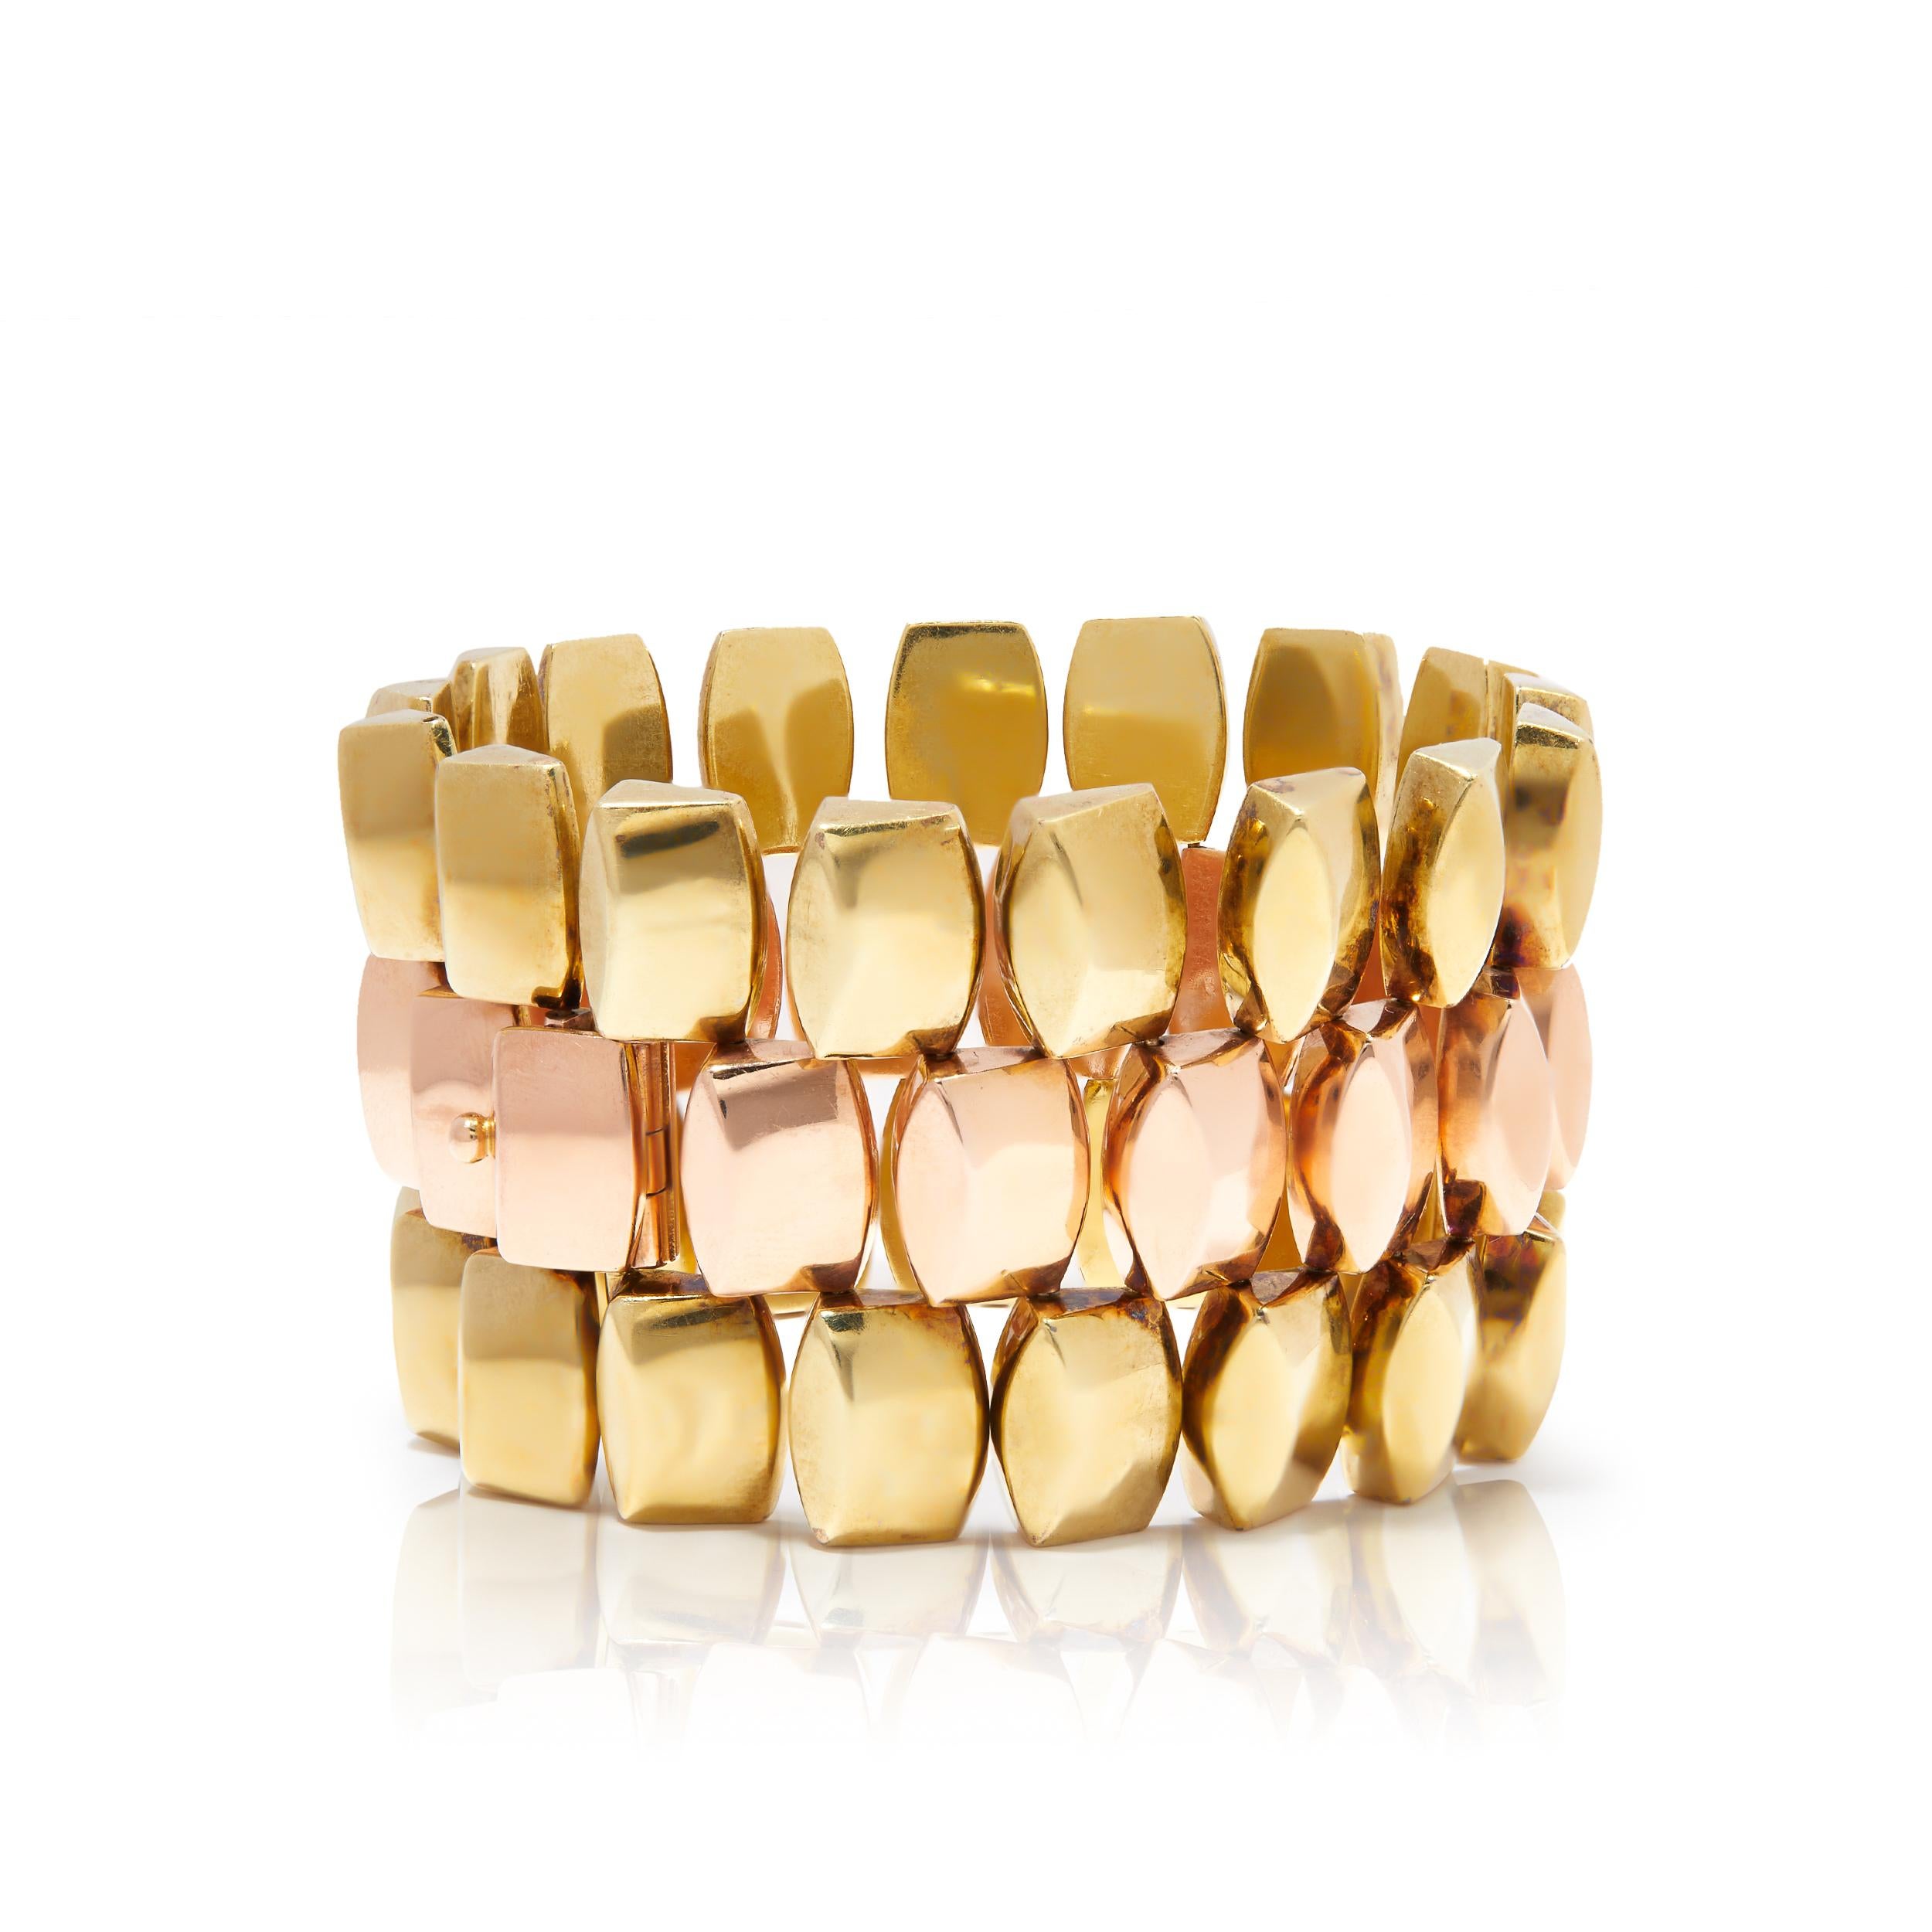 Get ready for Retro galore with this fabulous geometric link bracelet from the era of cocktail jewellery! Sleekly sculpted in gleaming 14ct gold, the three rows are composed of multi-dimensional links interwoven in an ingenious geometric pattern.